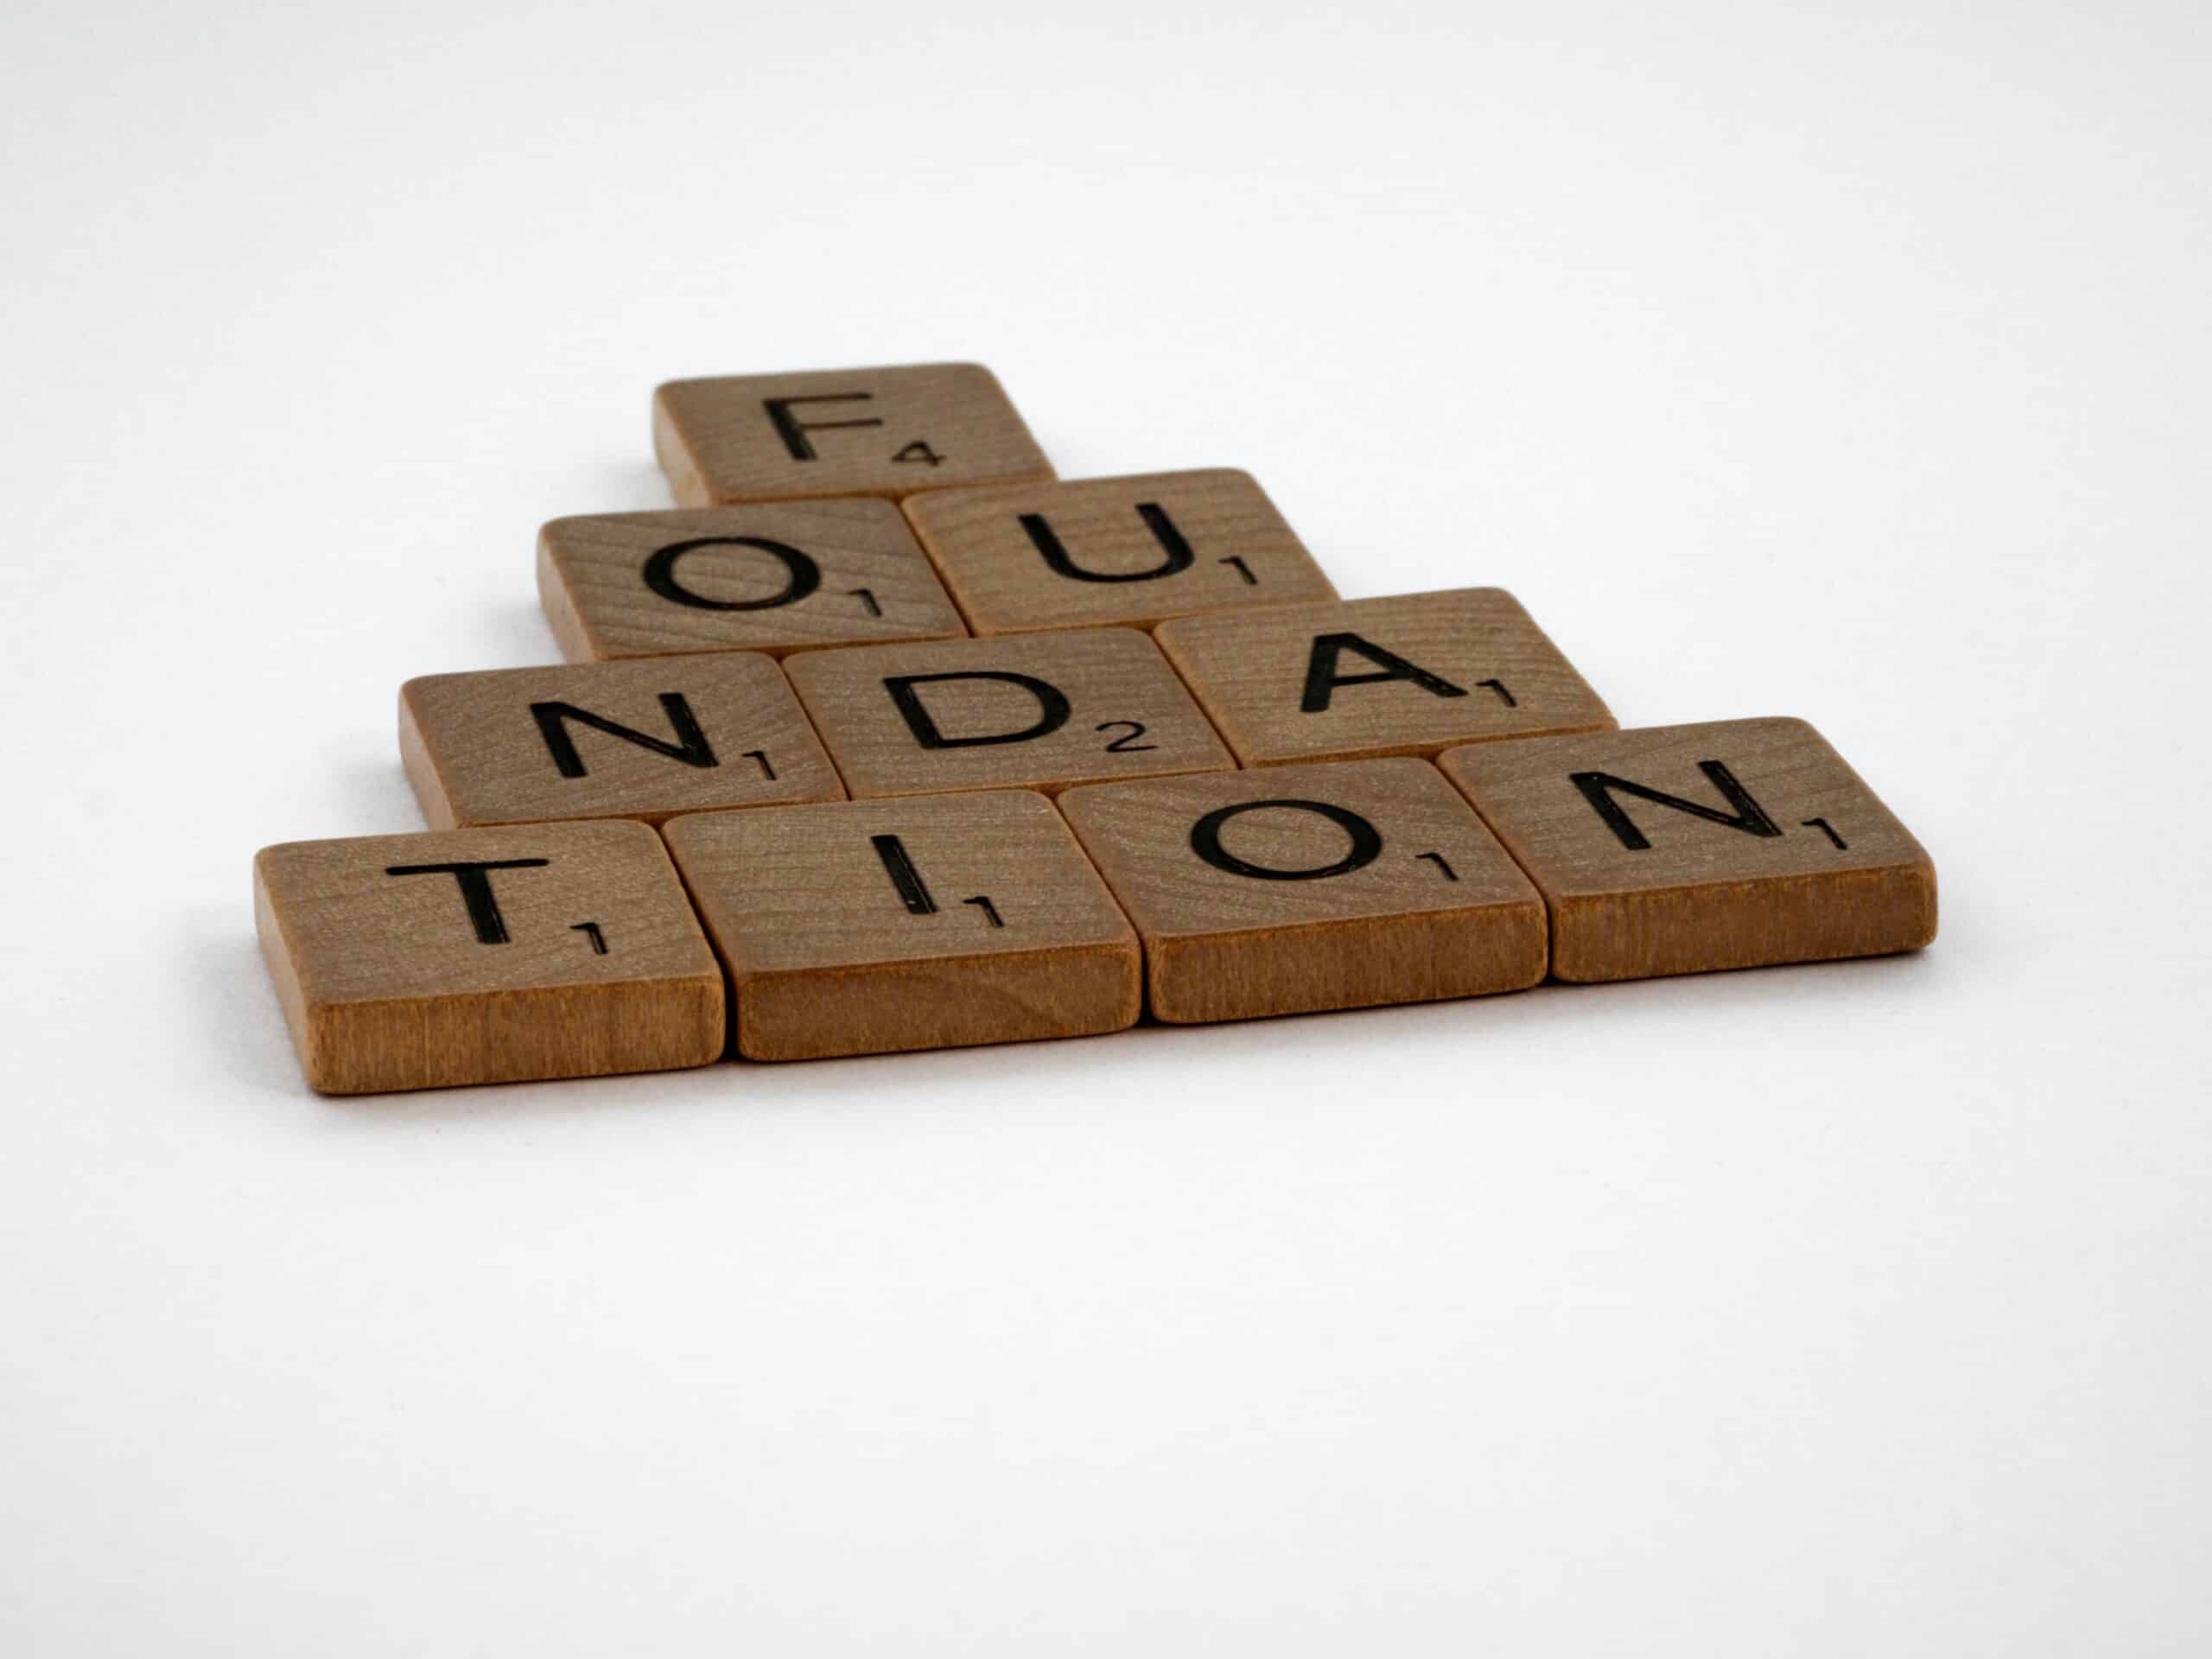 Scrabble tiles spelling "foundation." Relevant to Foundation Models, no?